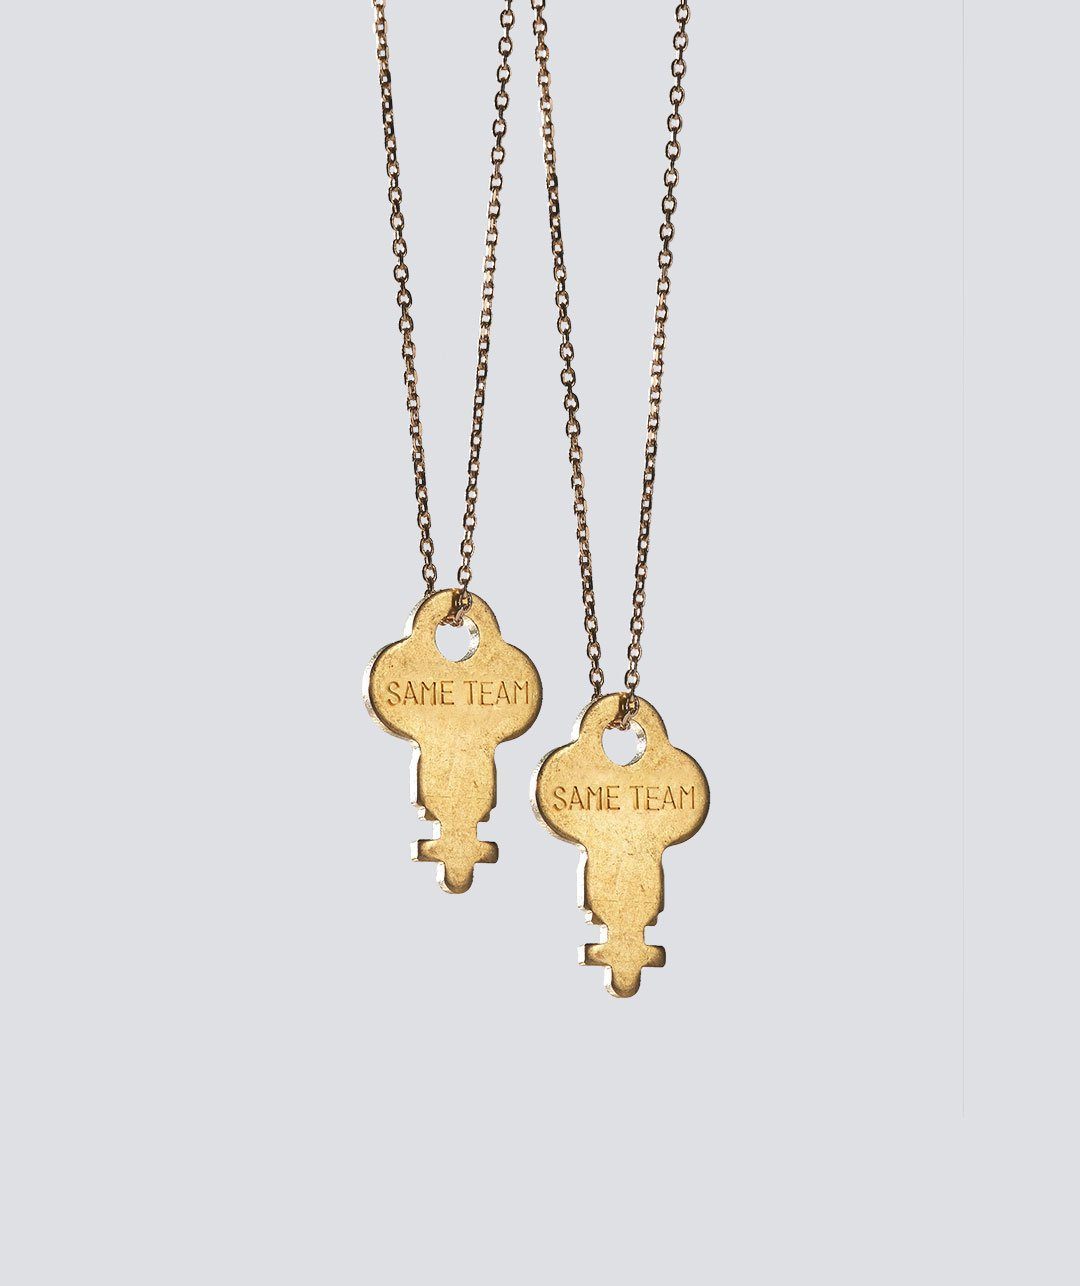 Best Friends Gold Dainty Key Necklace Set Necklaces The Giving Keys SAME TEAM GOLD 